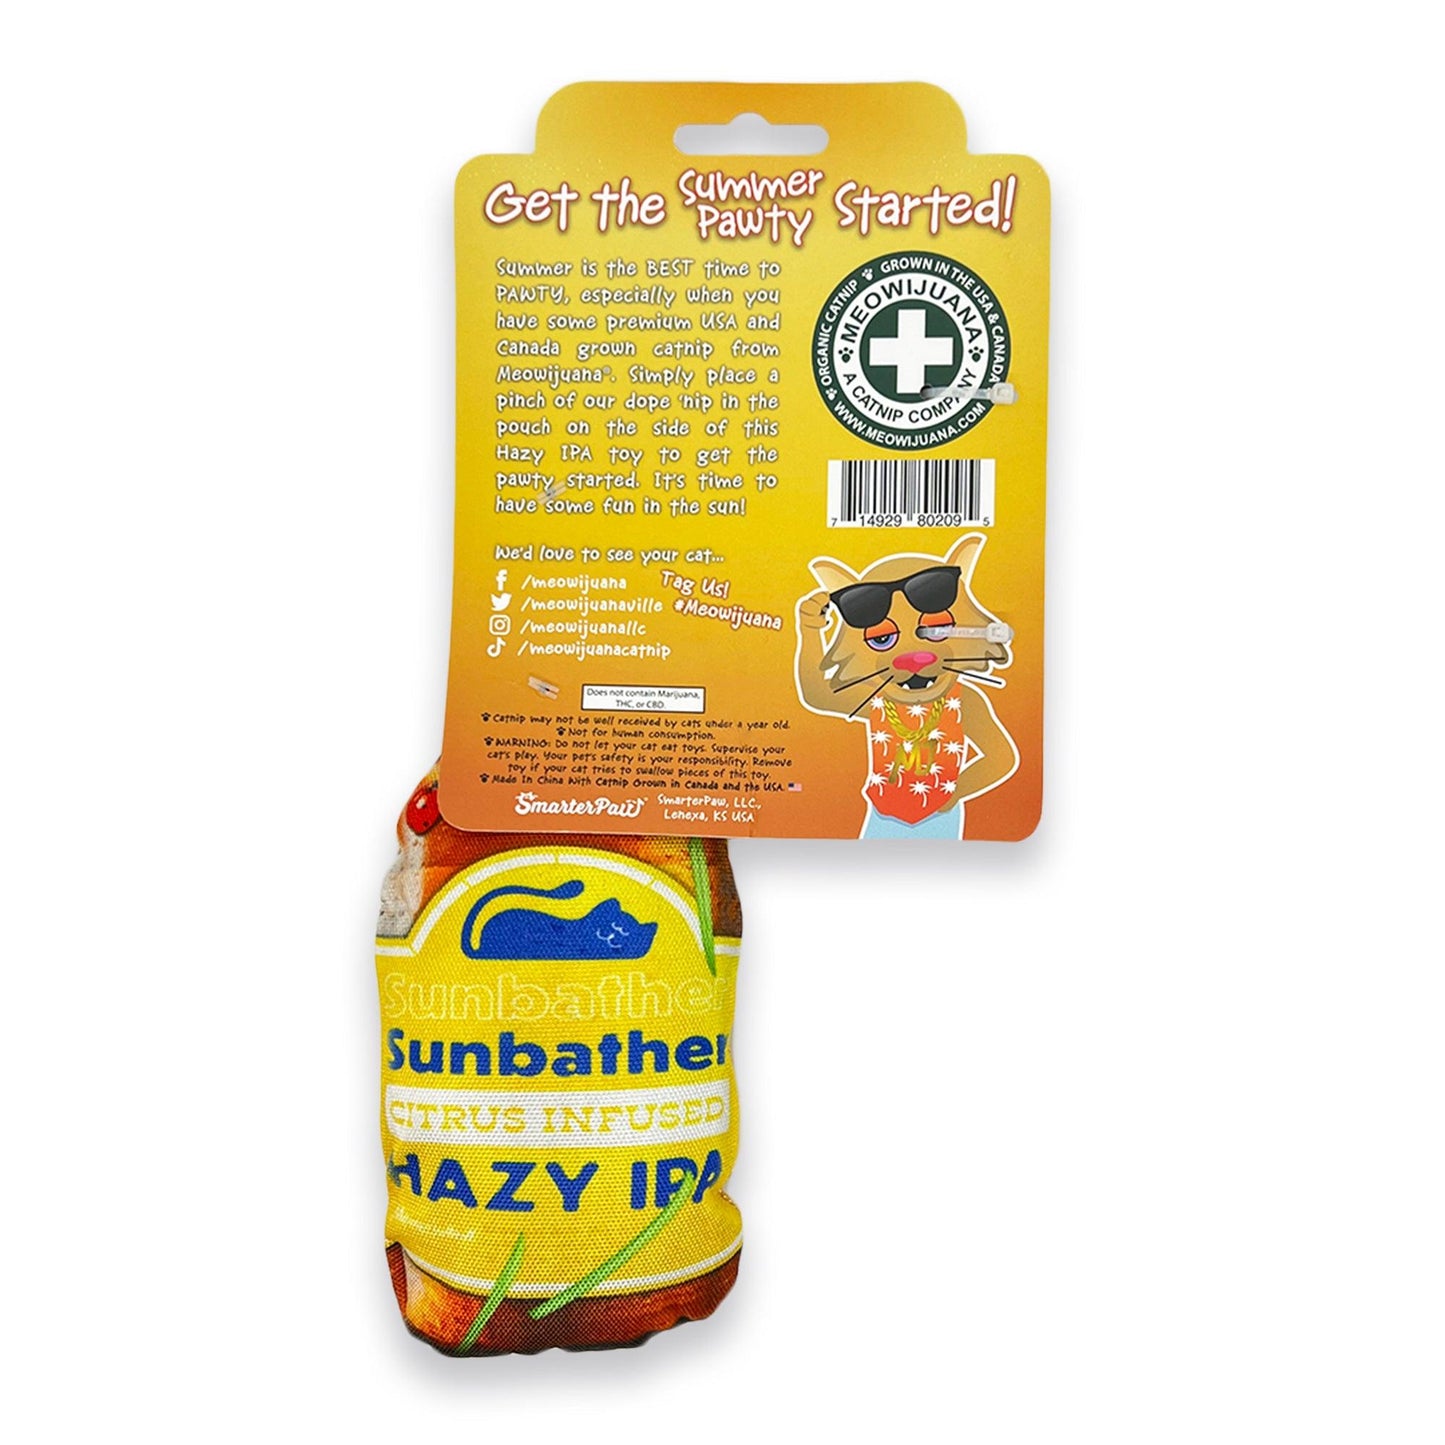 Get the Summer Pawty Started Refillable Hazy IPA